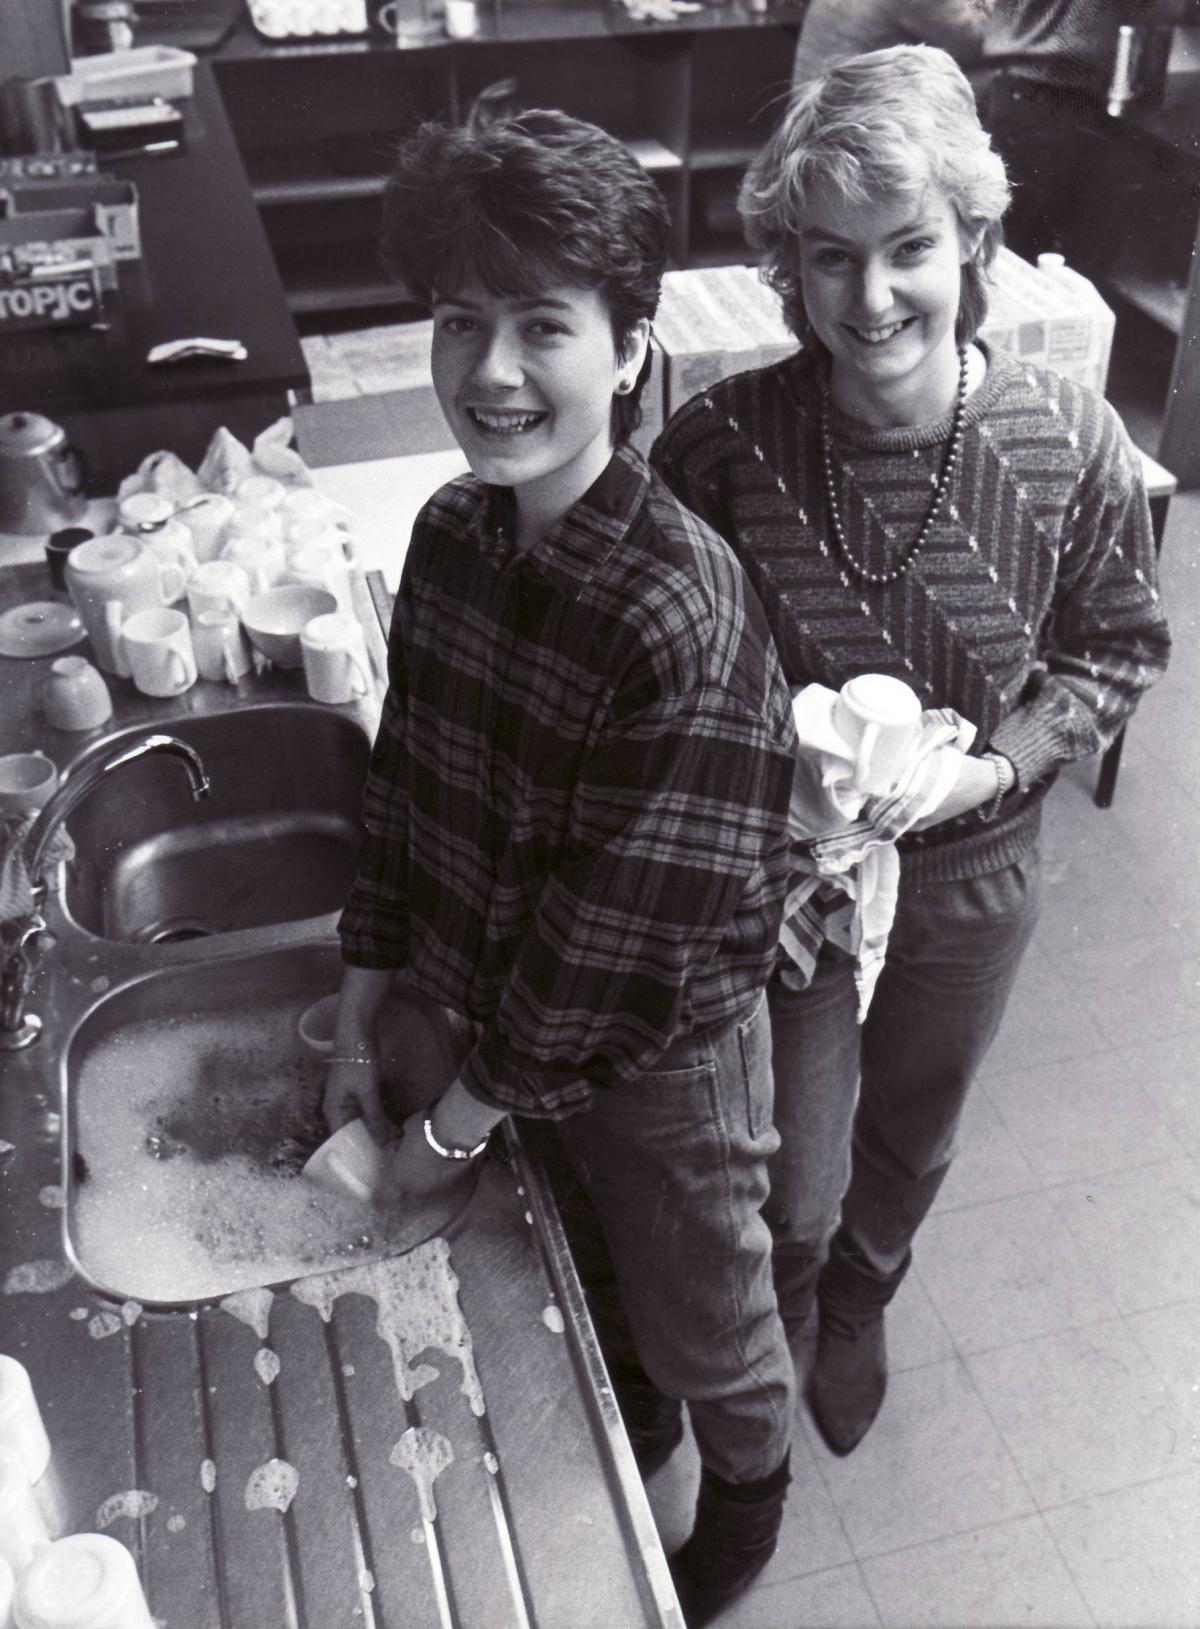 Working in the canteen in 1985